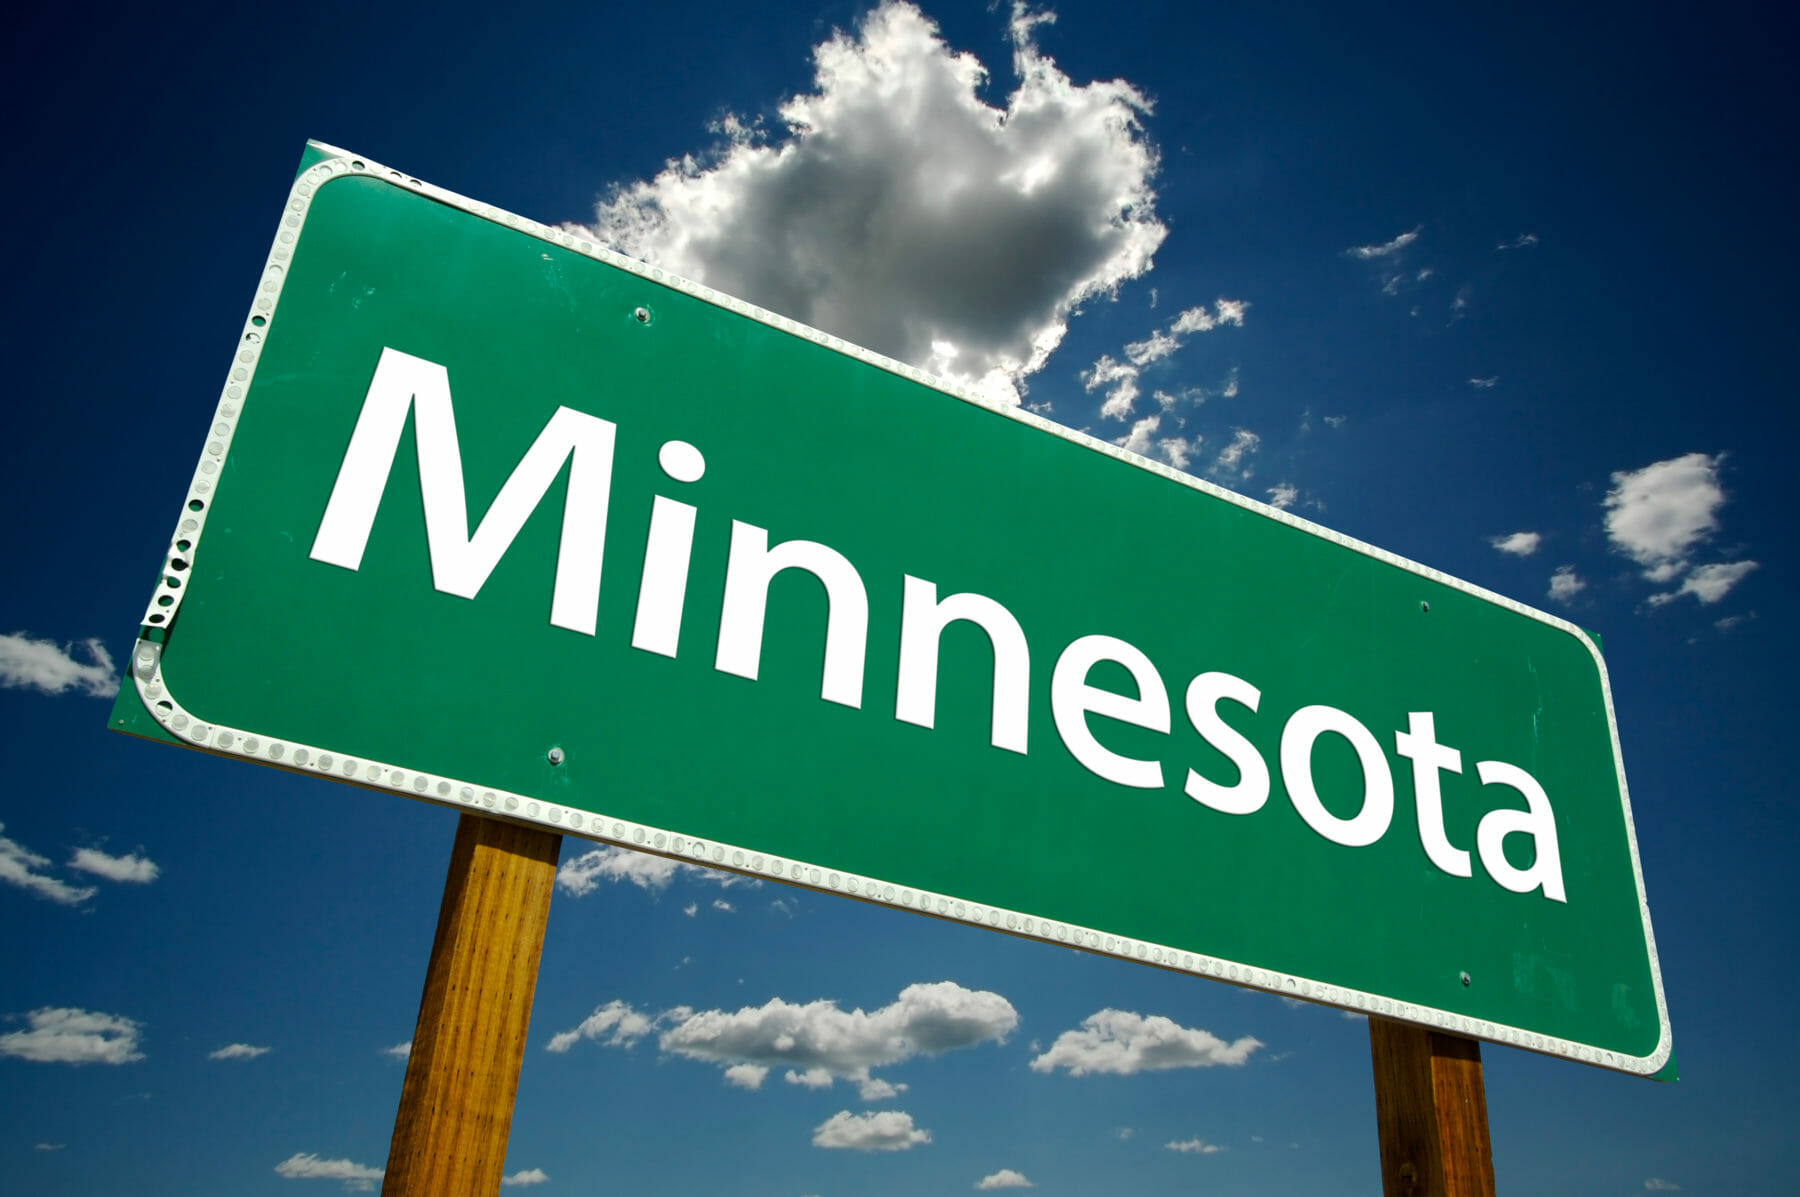 Minneapolis Professional Associations and Organizations List - Job Seekers Blog - JobStars Resume Writing Services and Career Coaching